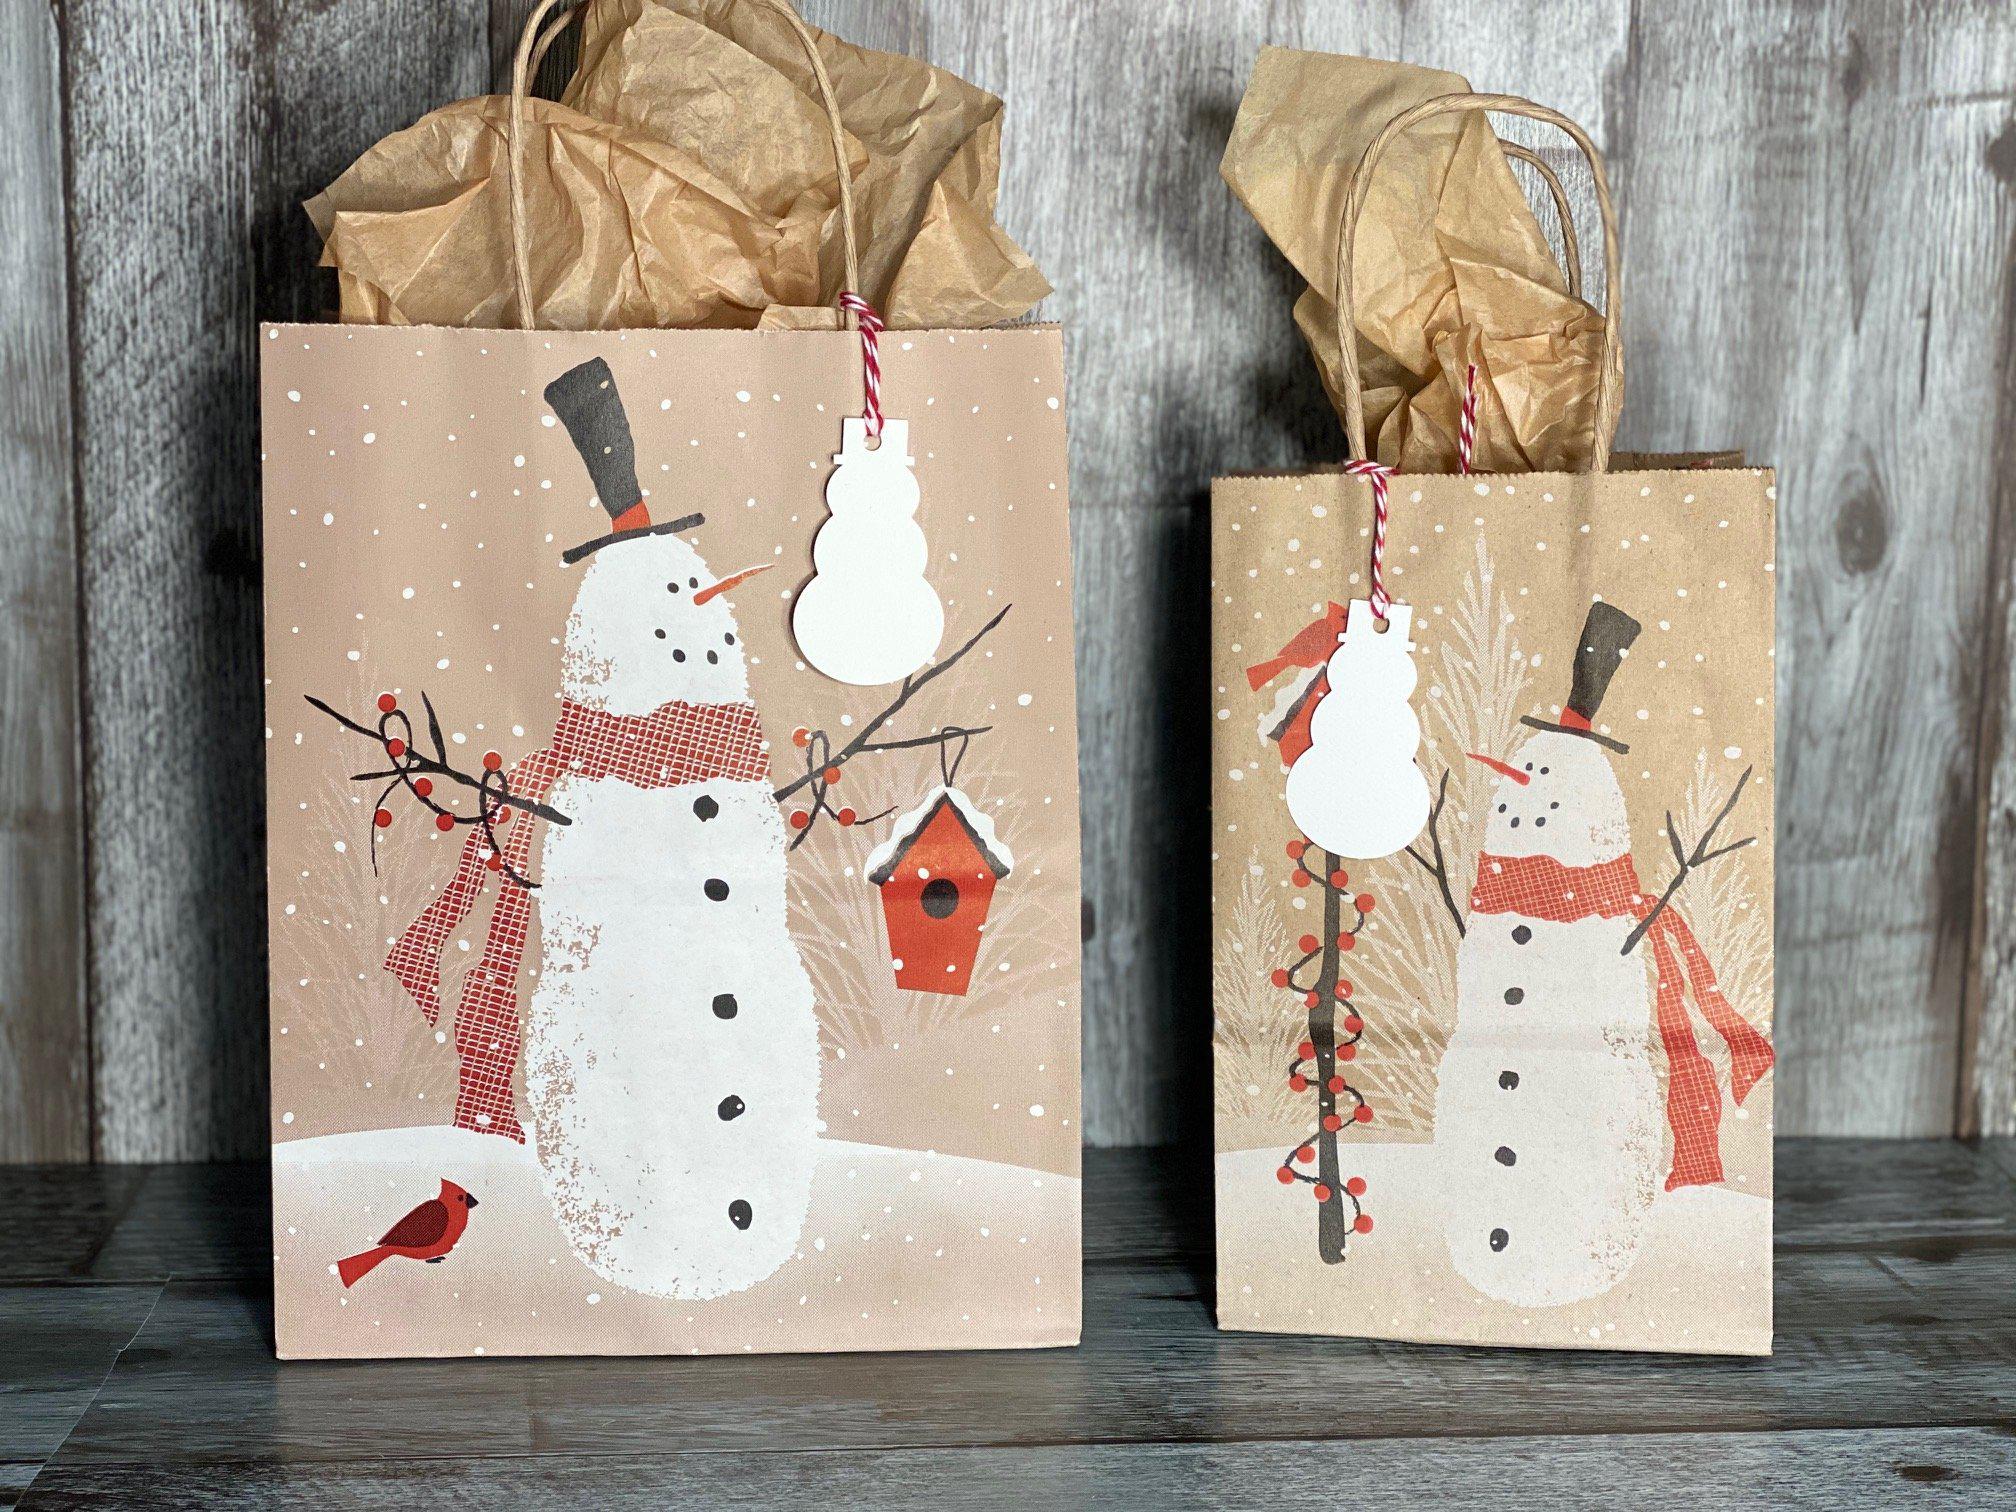 ELECTROPRIME 0649 Snowman Bag Red Christmas Gift Bag Drawstring Ornament  Creative Candy Bag : Amazon.in: Bags, Wallets and Luggage